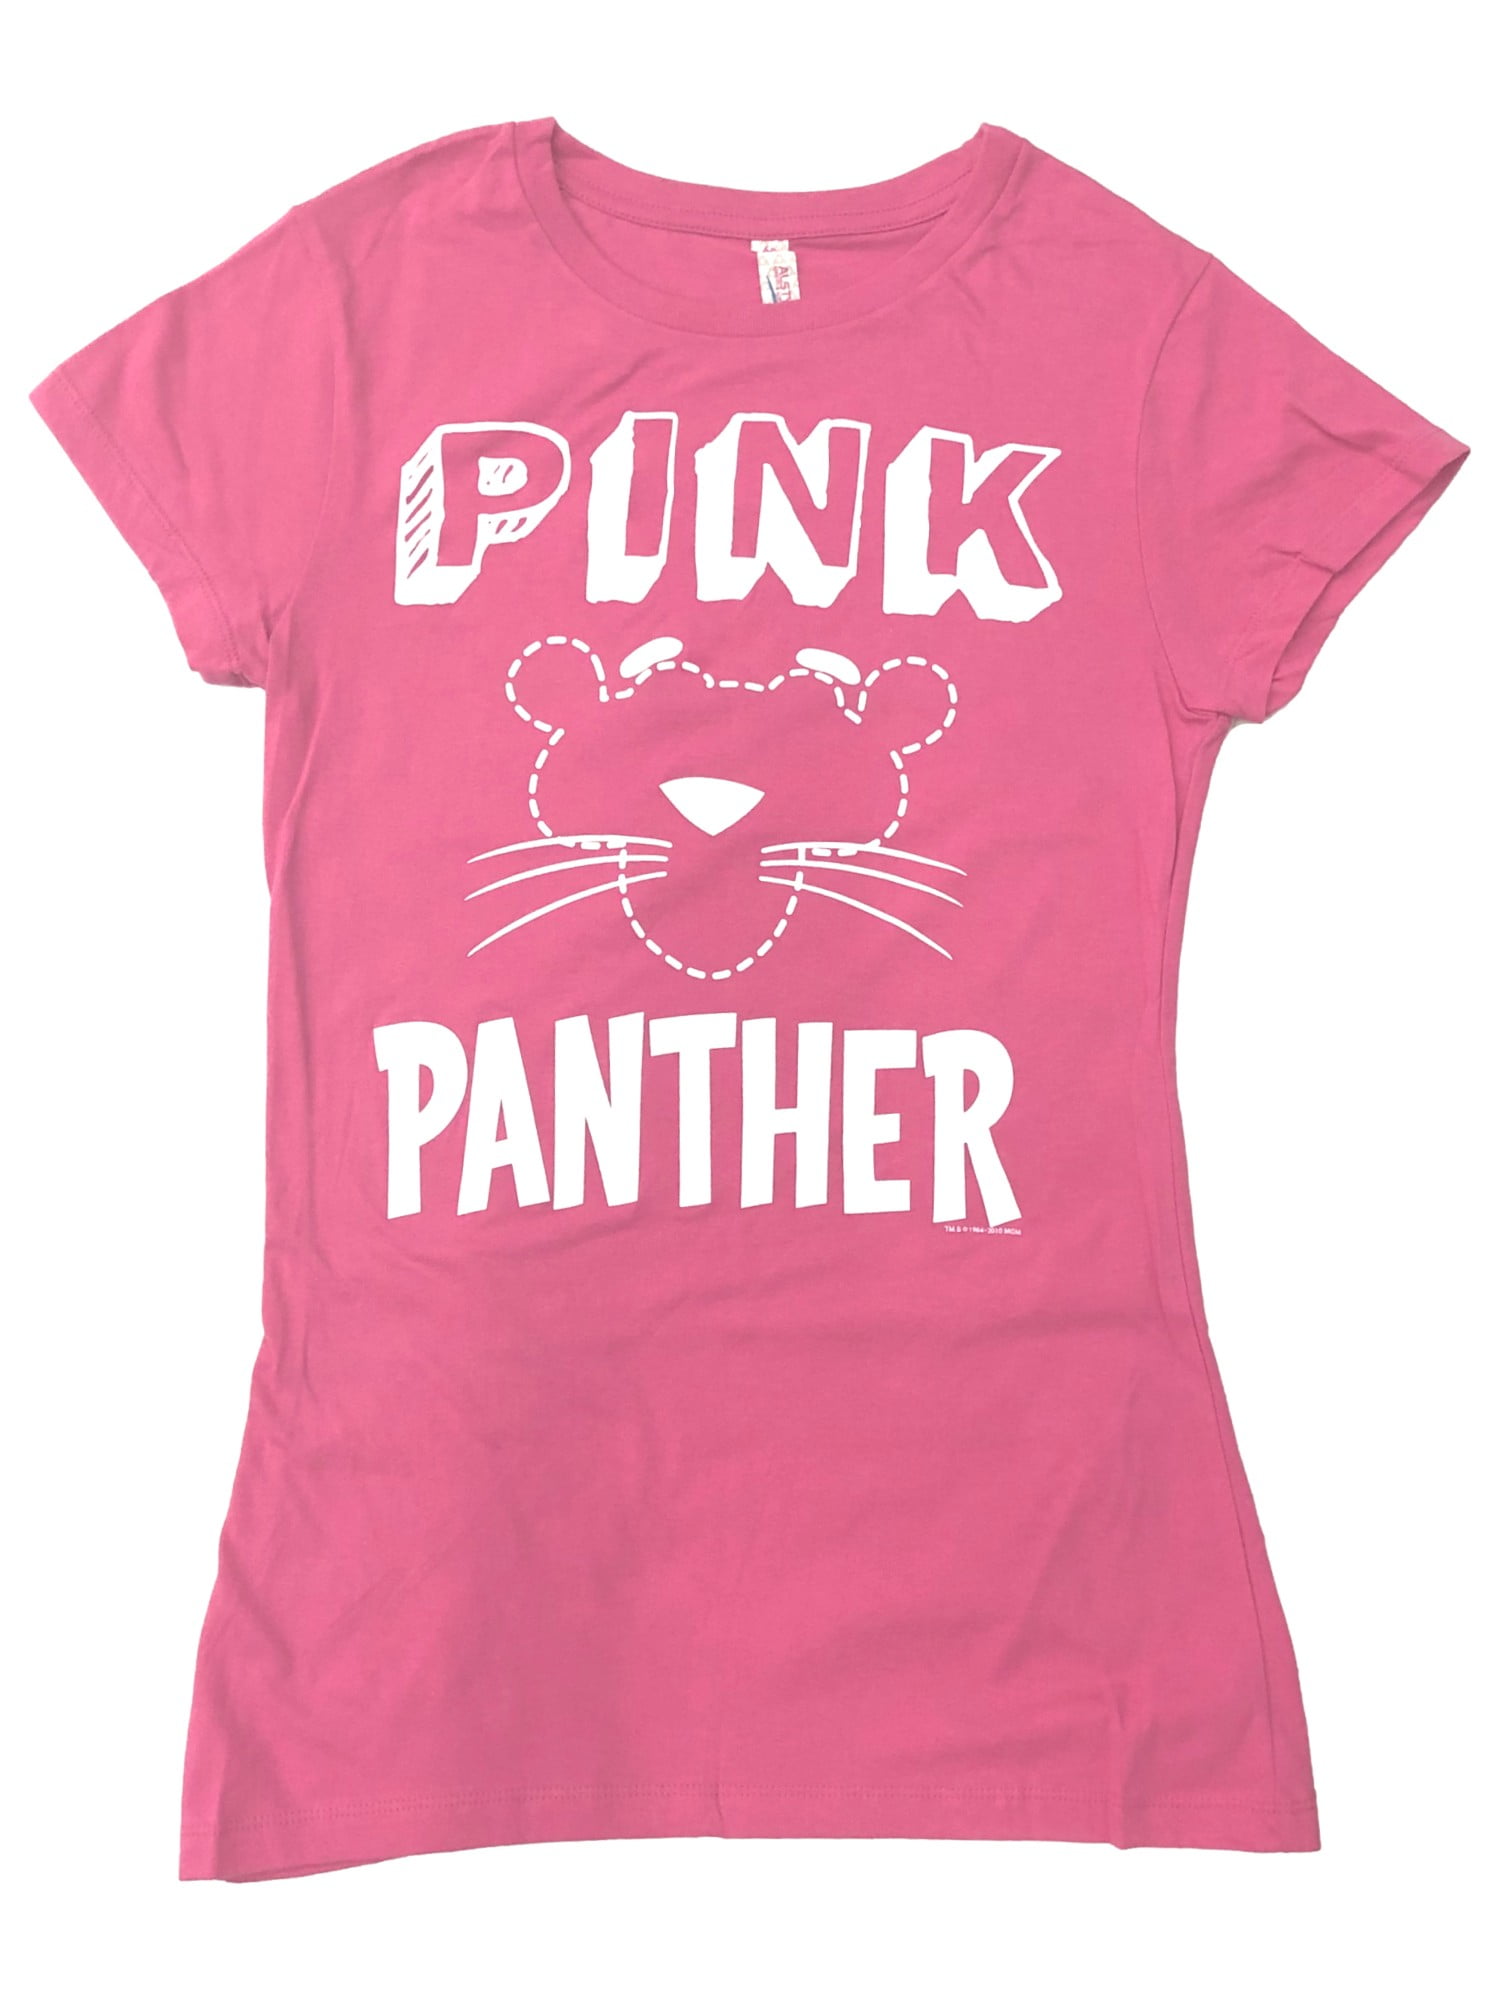 Shirts & Tops, Youth Pink Panther Jersey